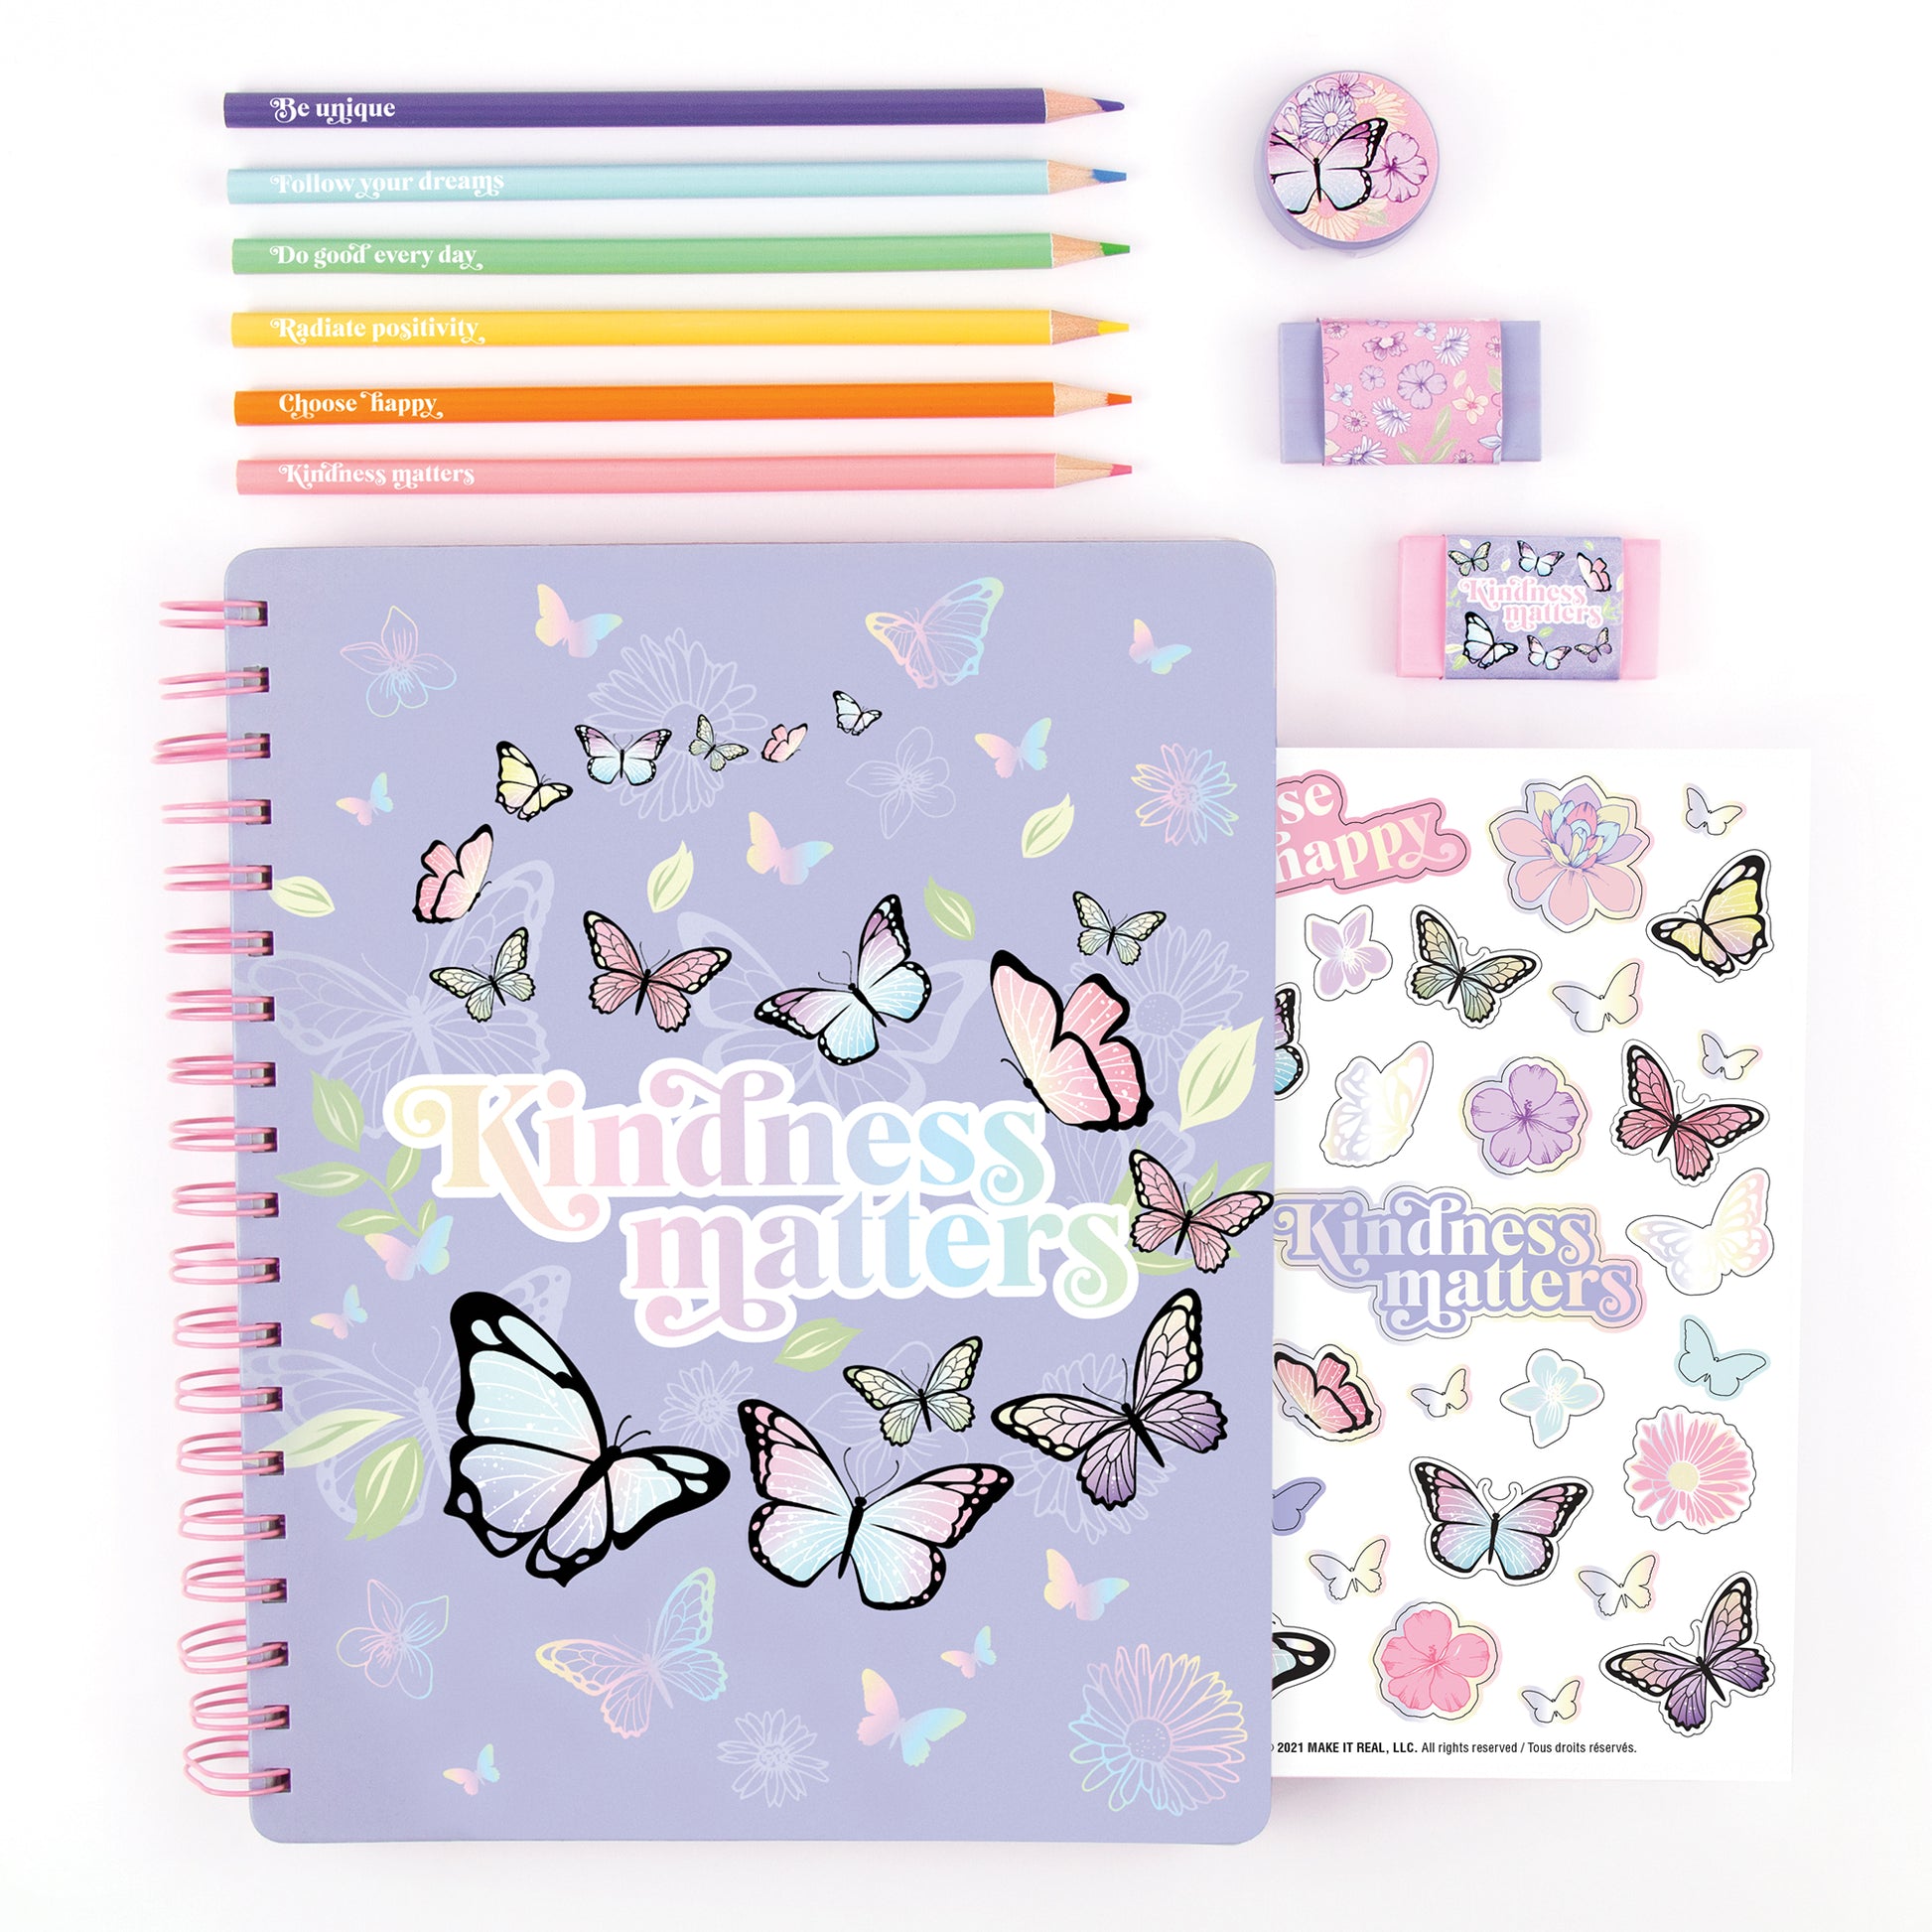 Butterfly Deluxe Journaling Set – Make It Real